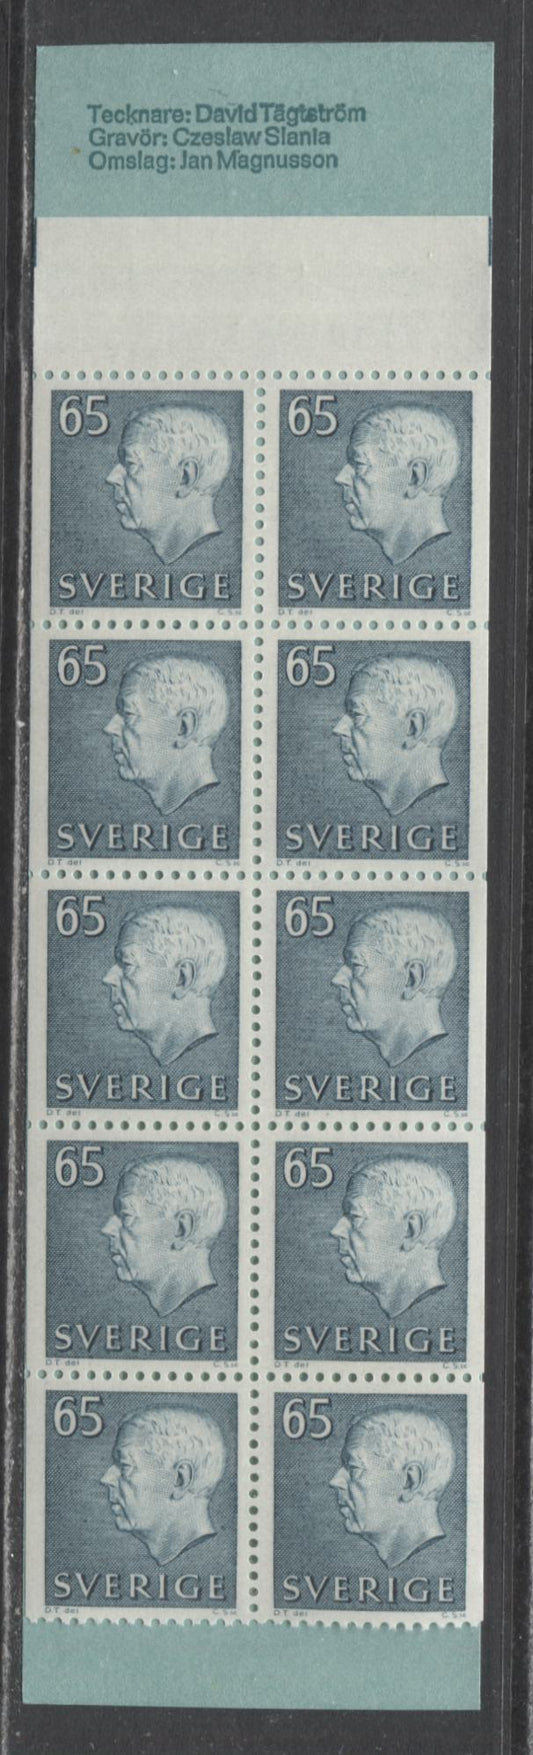 Sweden SC#672D (Facit #H246) 65 Ore Dull Blue Green 1971 Re-Engraved King Gustav VI Adolf Definitive Issue, A VFNH Booklet of 10, Click on Listing to See ALL Pictures, Estimated Value $8